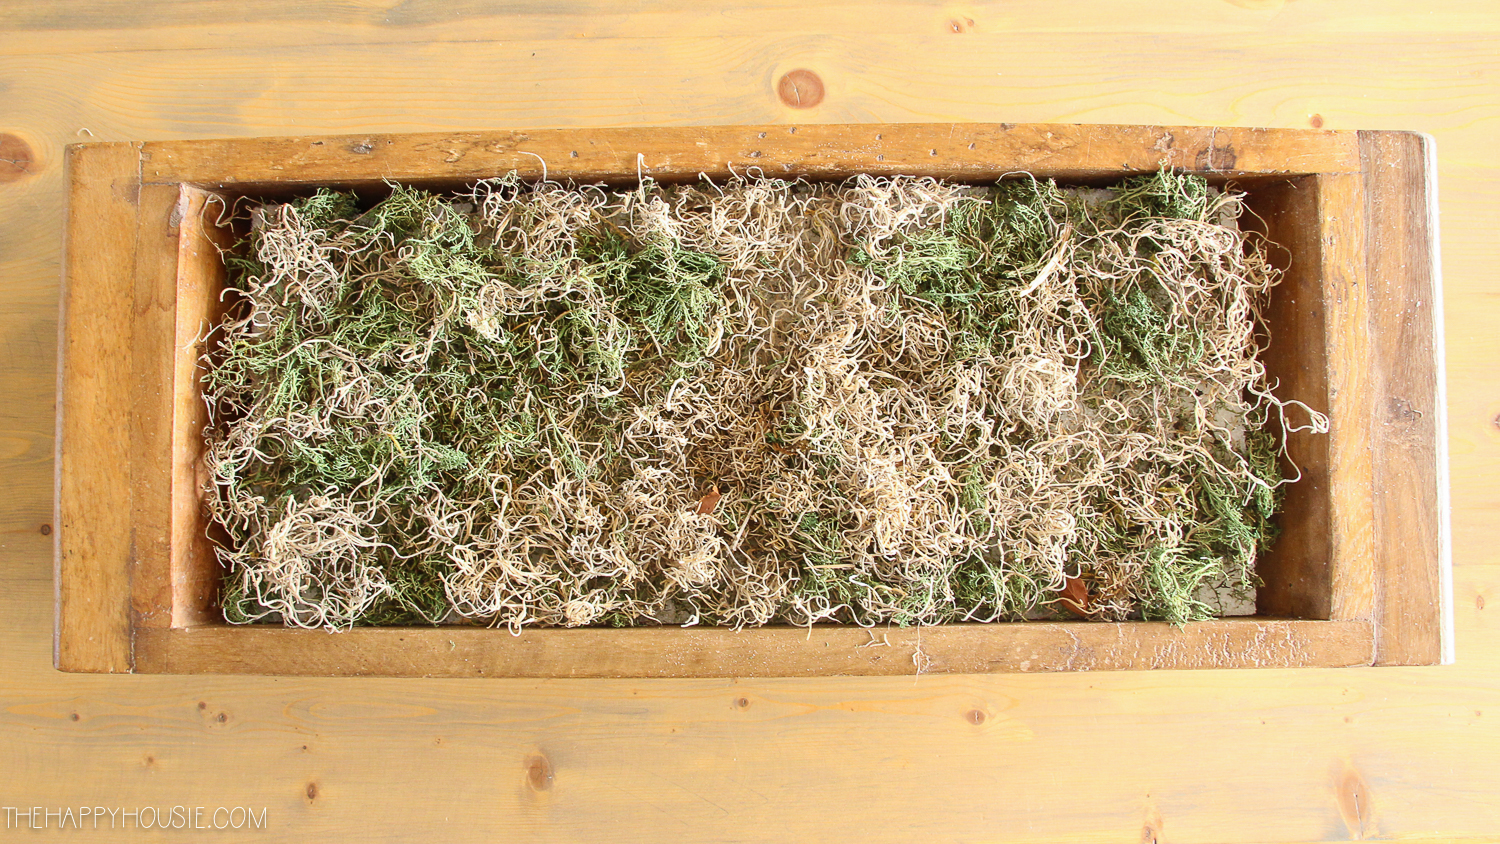 Covering the styrofoam with moss.